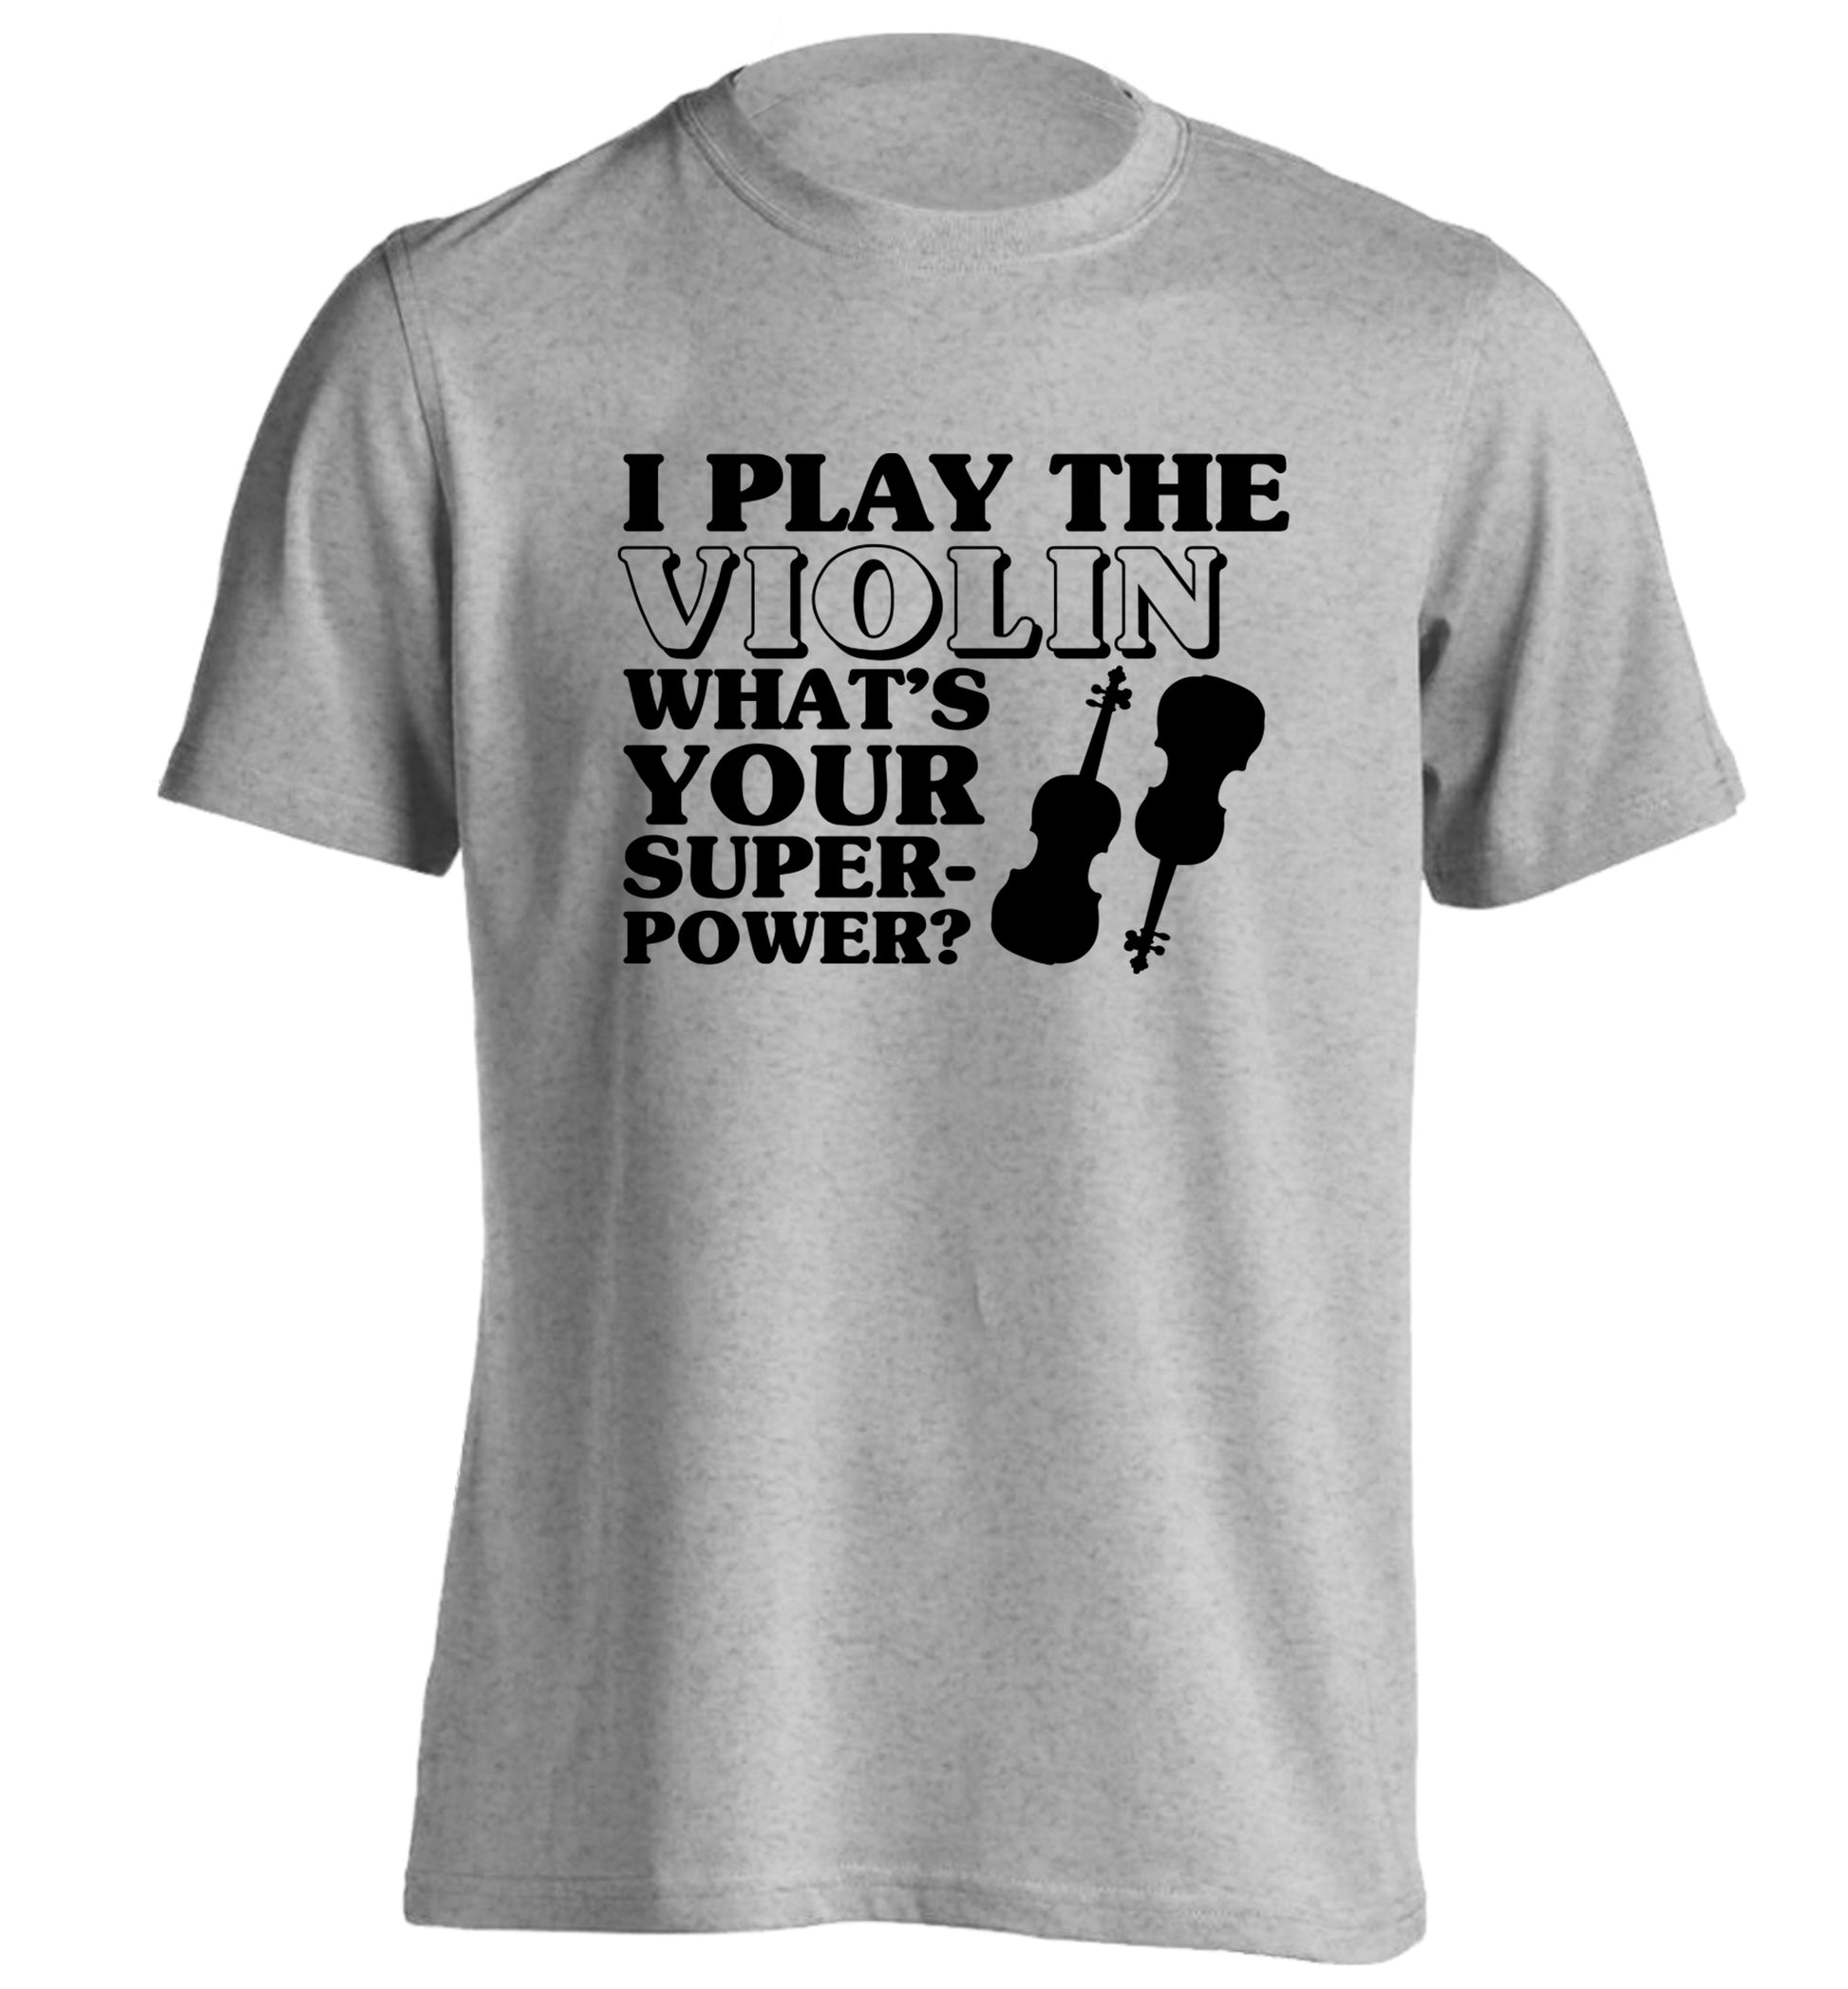 I Play Violin What's Your Superpower? adults unisex grey Tshirt 2XL